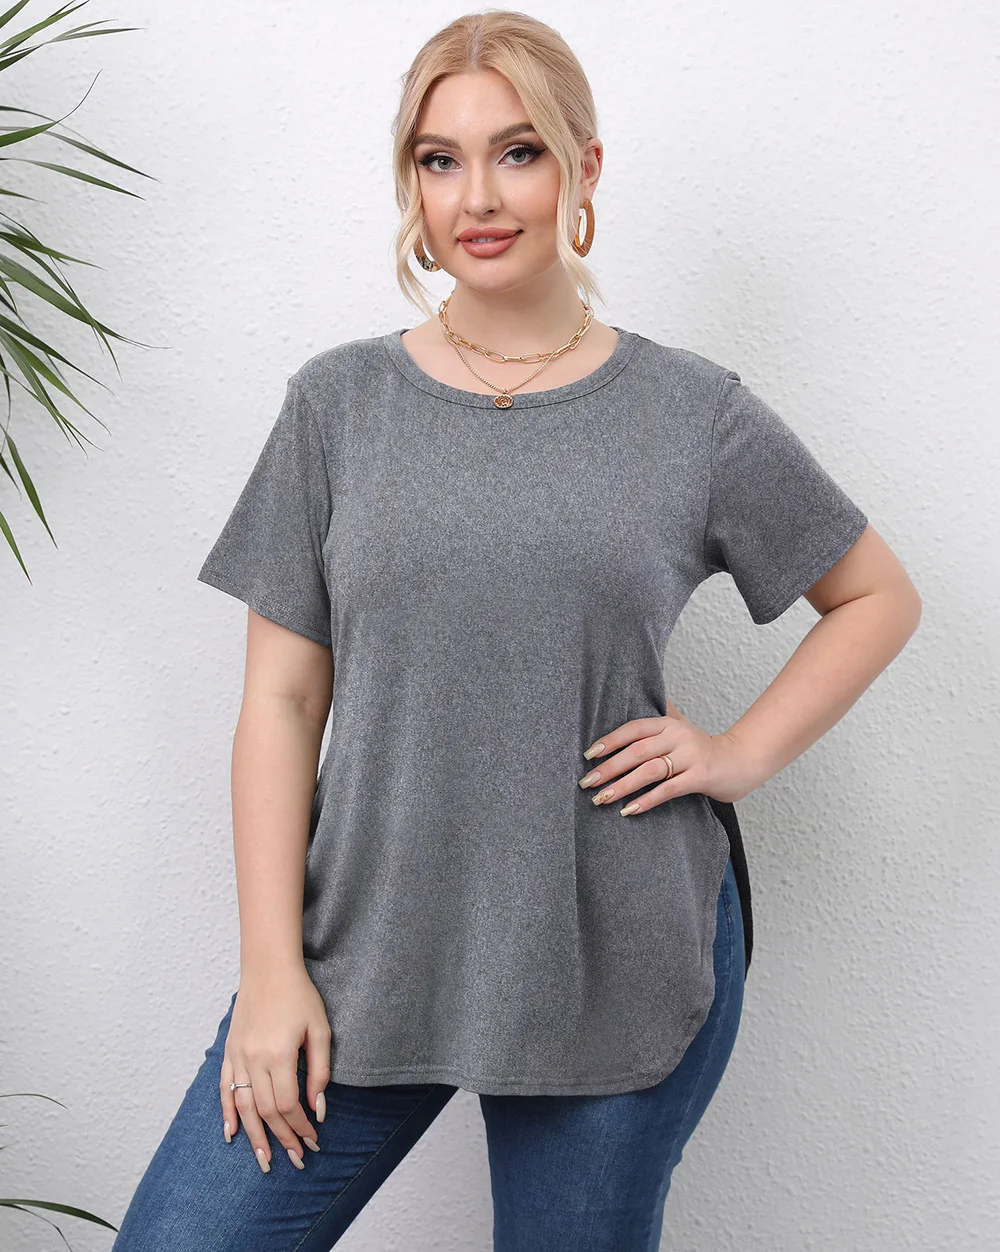 GIBSIE Plus Size O-Neck Women Split Side Solid T-Shirt Casual Summer Short Sleeved Tee 3xl 4xl Women Basic Tops Pulovers Clothes summer dresses